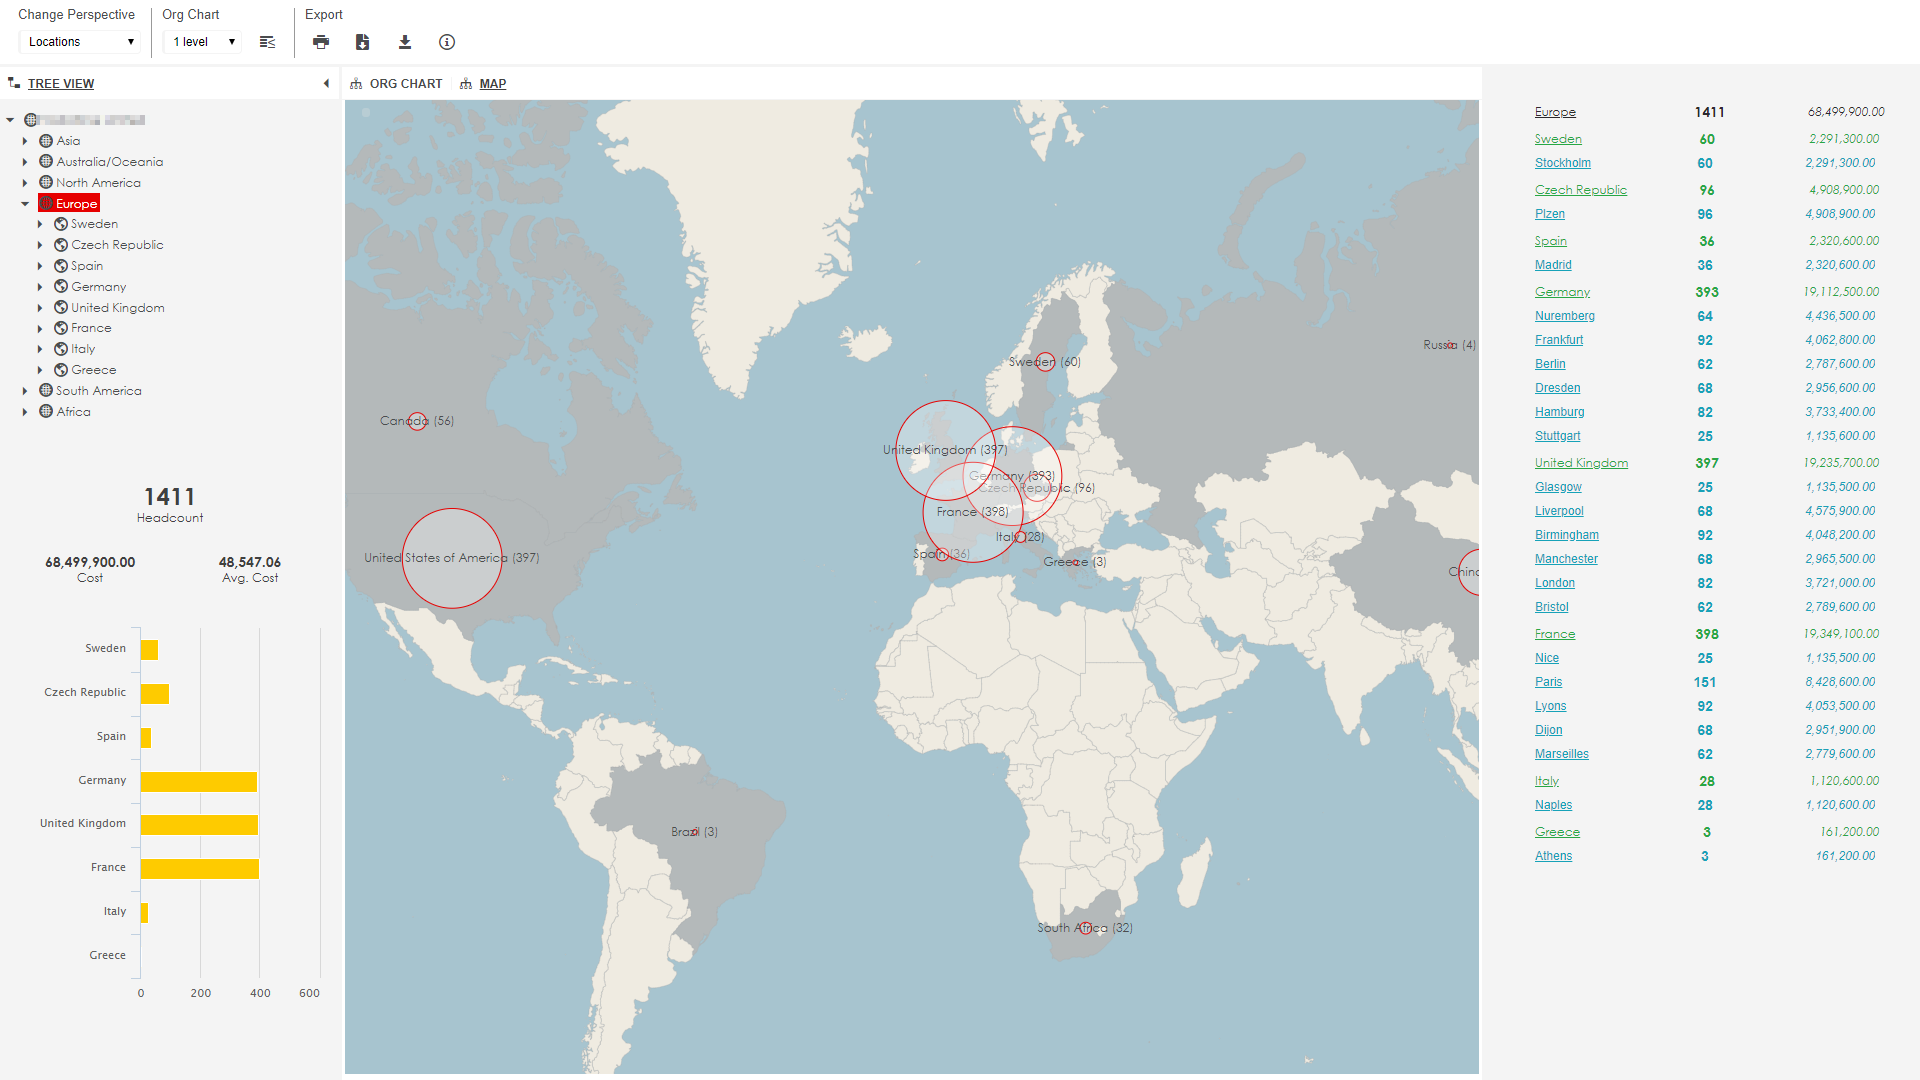 The dashboard view provides a quick overview e.g. of the global distribution of headcount